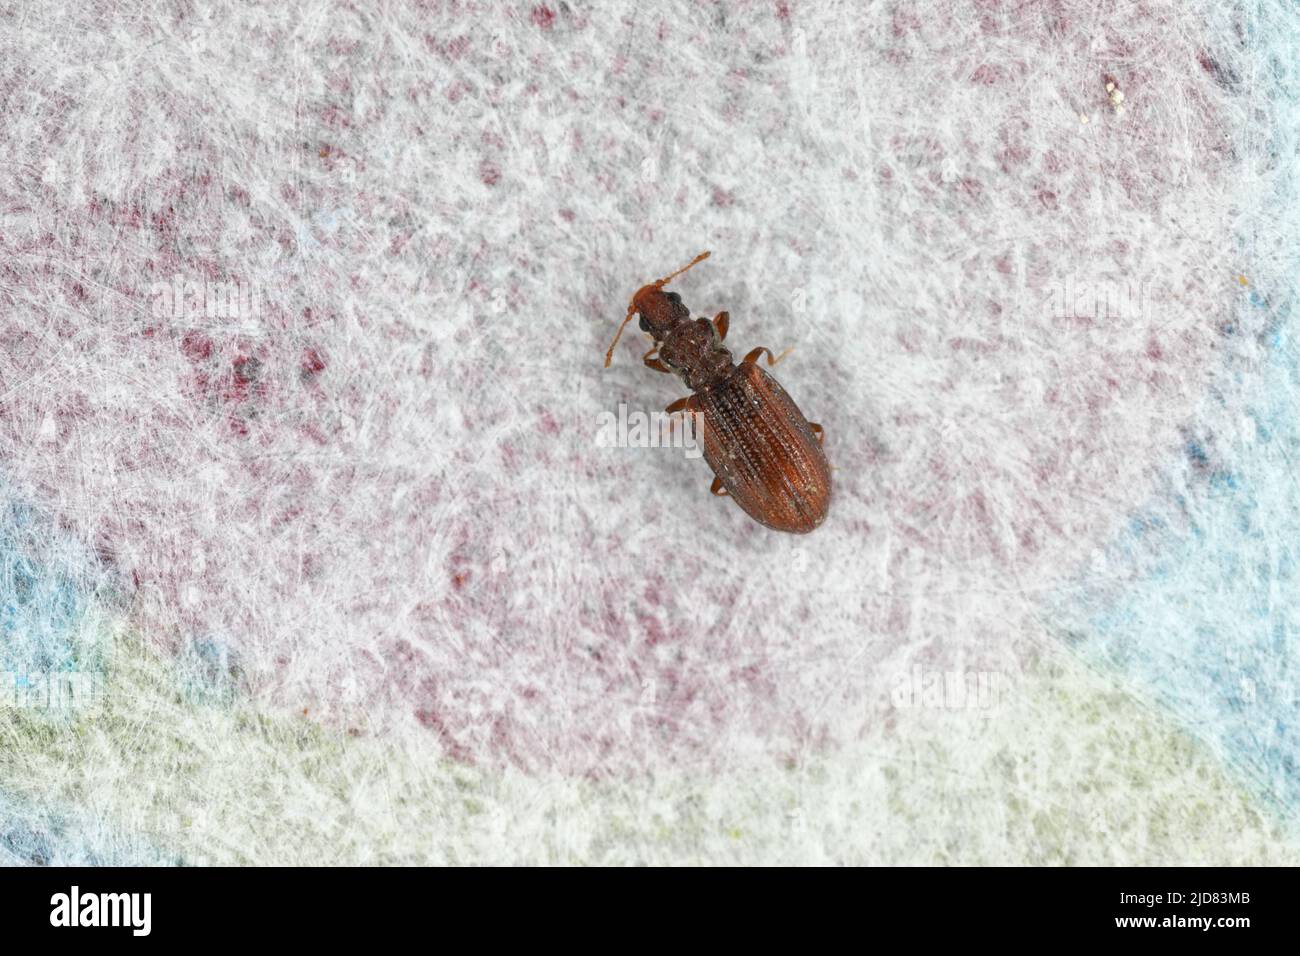 Tiny minute brown scavenger beetle Latridiidae on paper. High magnification. Stock Photo